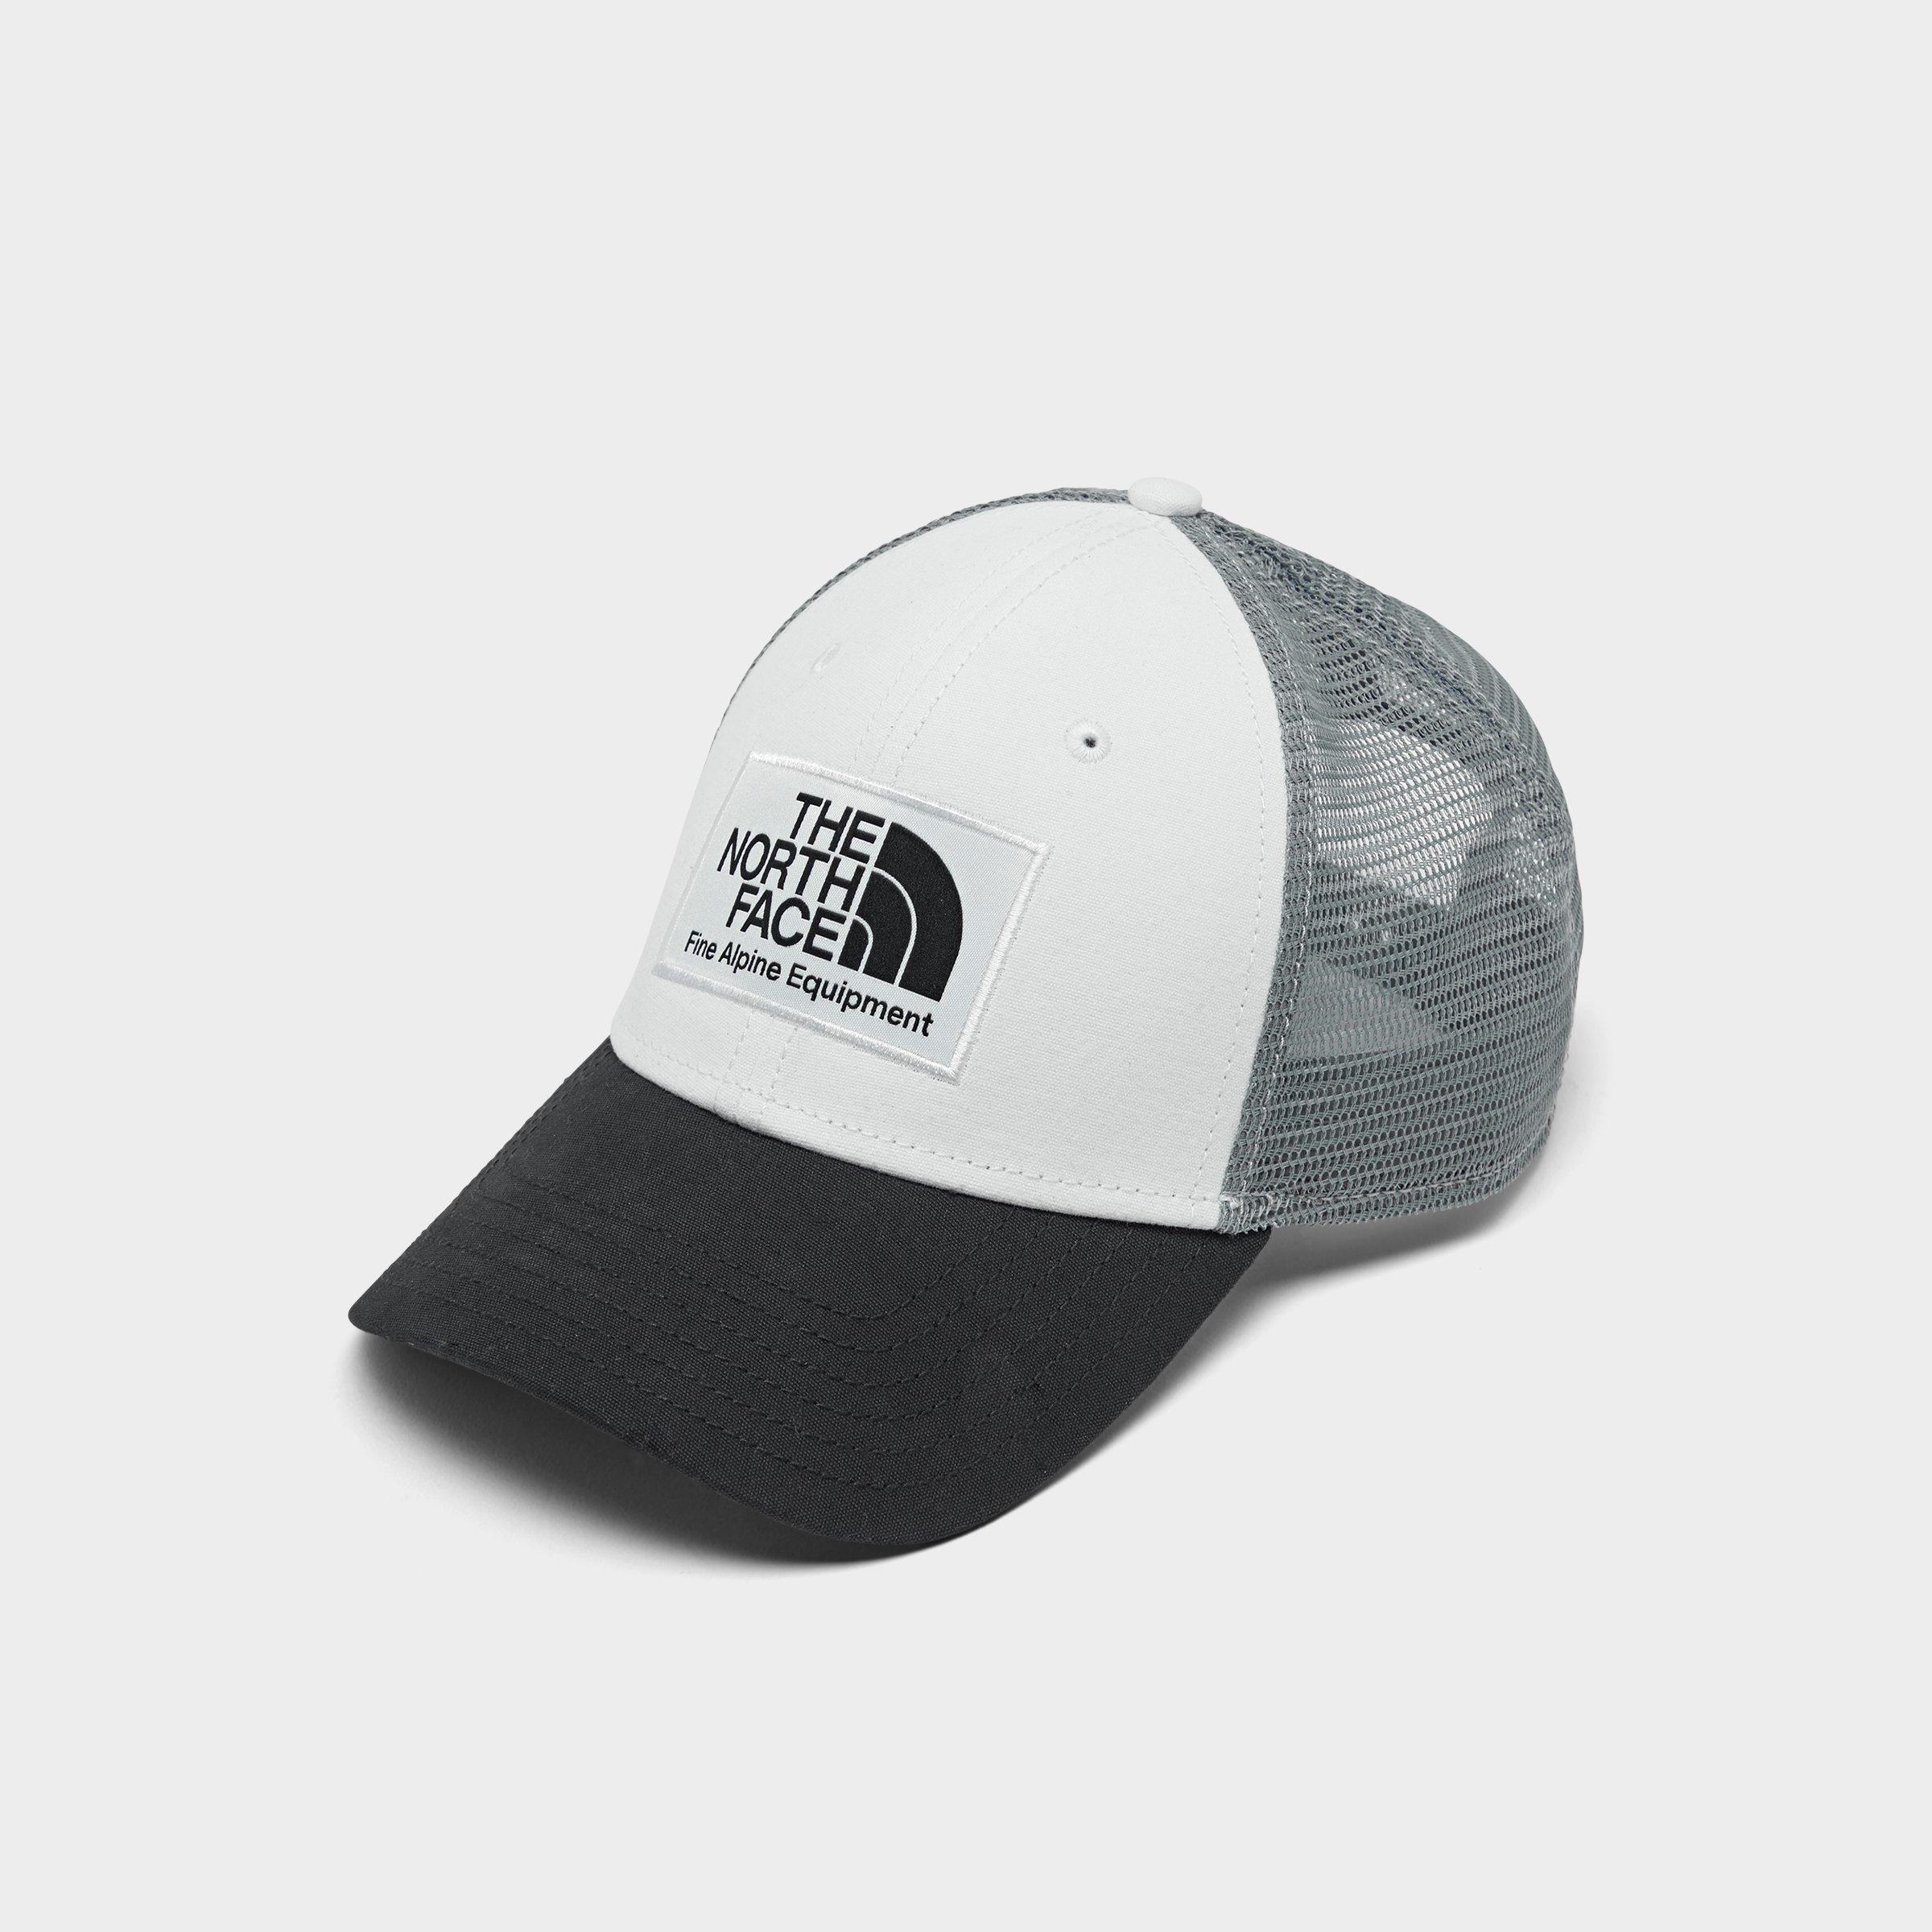 jd sports north face hat